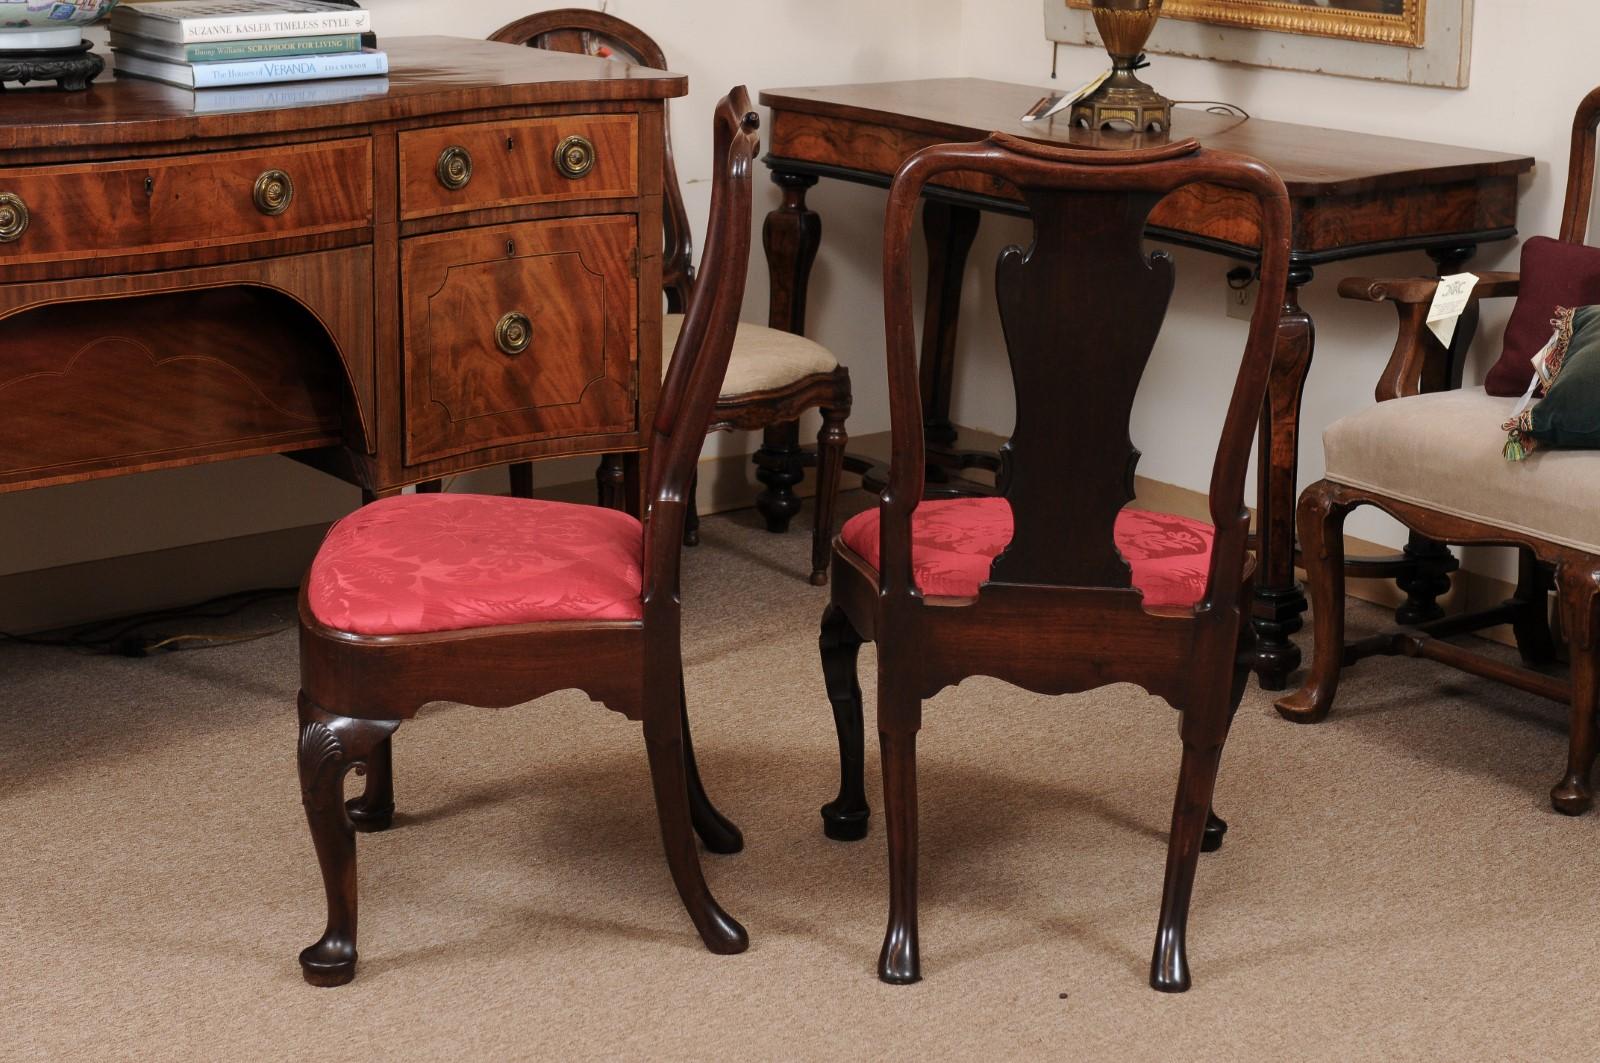 Upholstery Pair of Queen Anne Side Chairs in Walnut with Cabriole Legs & Pad Feet, 18th C